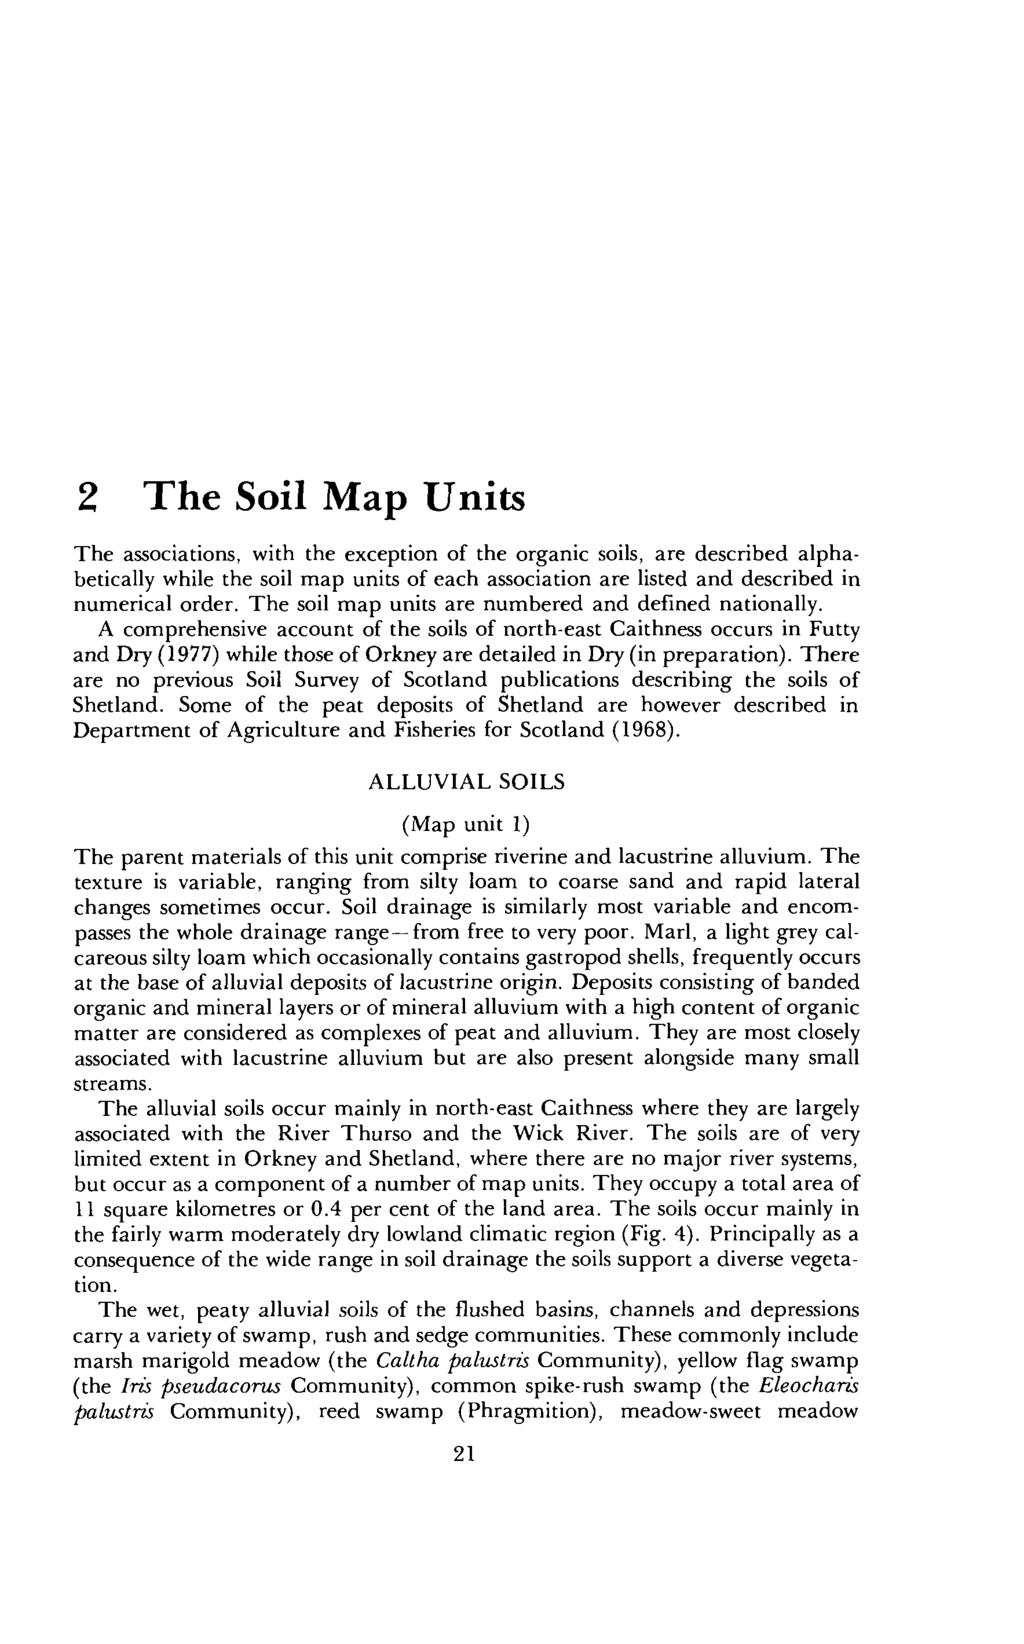 2 The Soil Map Units The associations, with the exception of the organic soils, are described alphabetically while the soil map units of each association are listed and described in numerical order.